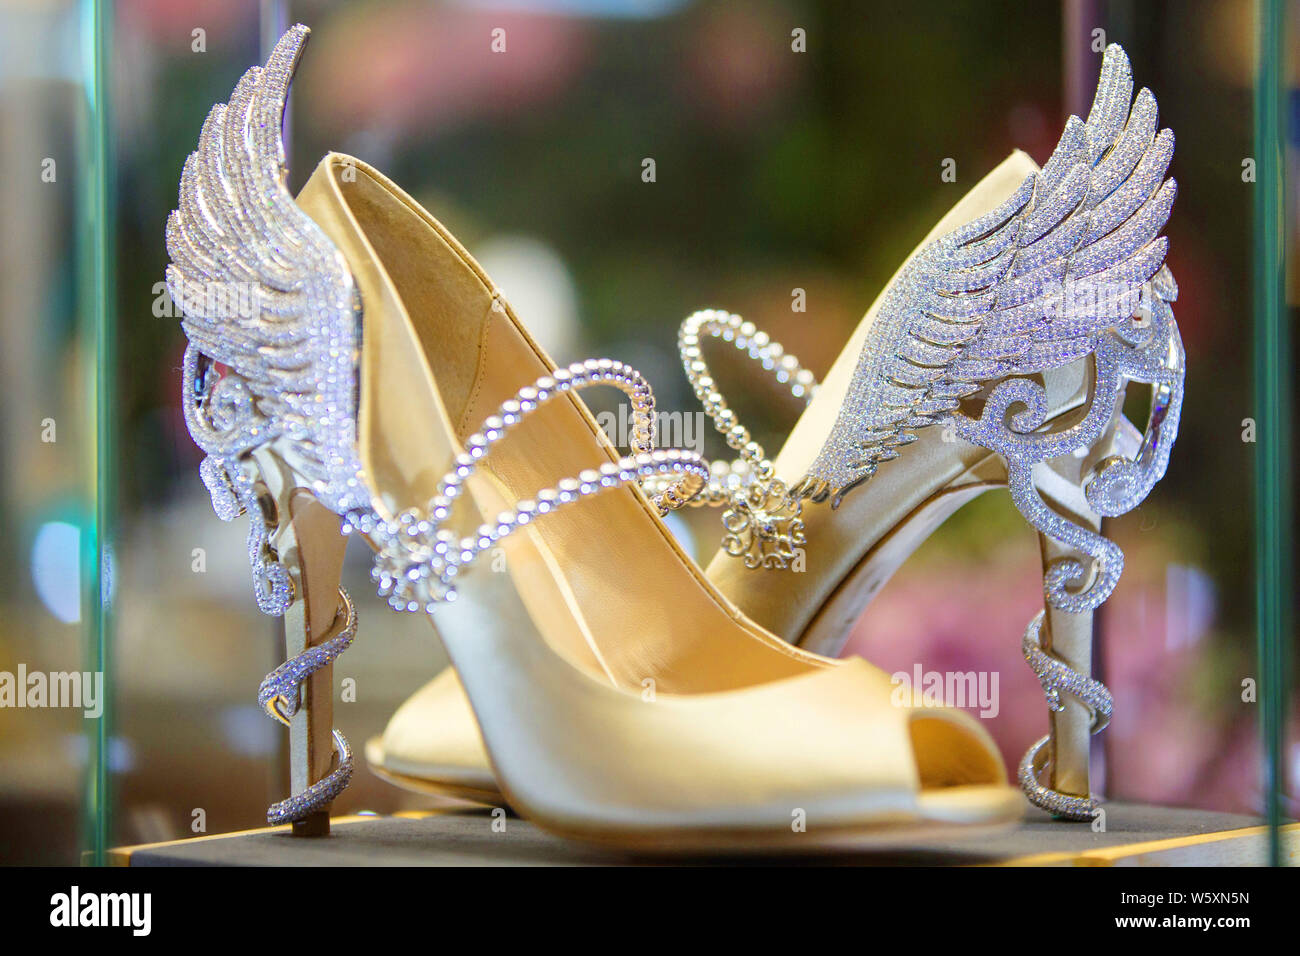 A pair of Jimmy Choo's luxury high heel shoes is on display during the First China International Import Expo (CIIE) and the Hongqiao International Eco Stock Photo